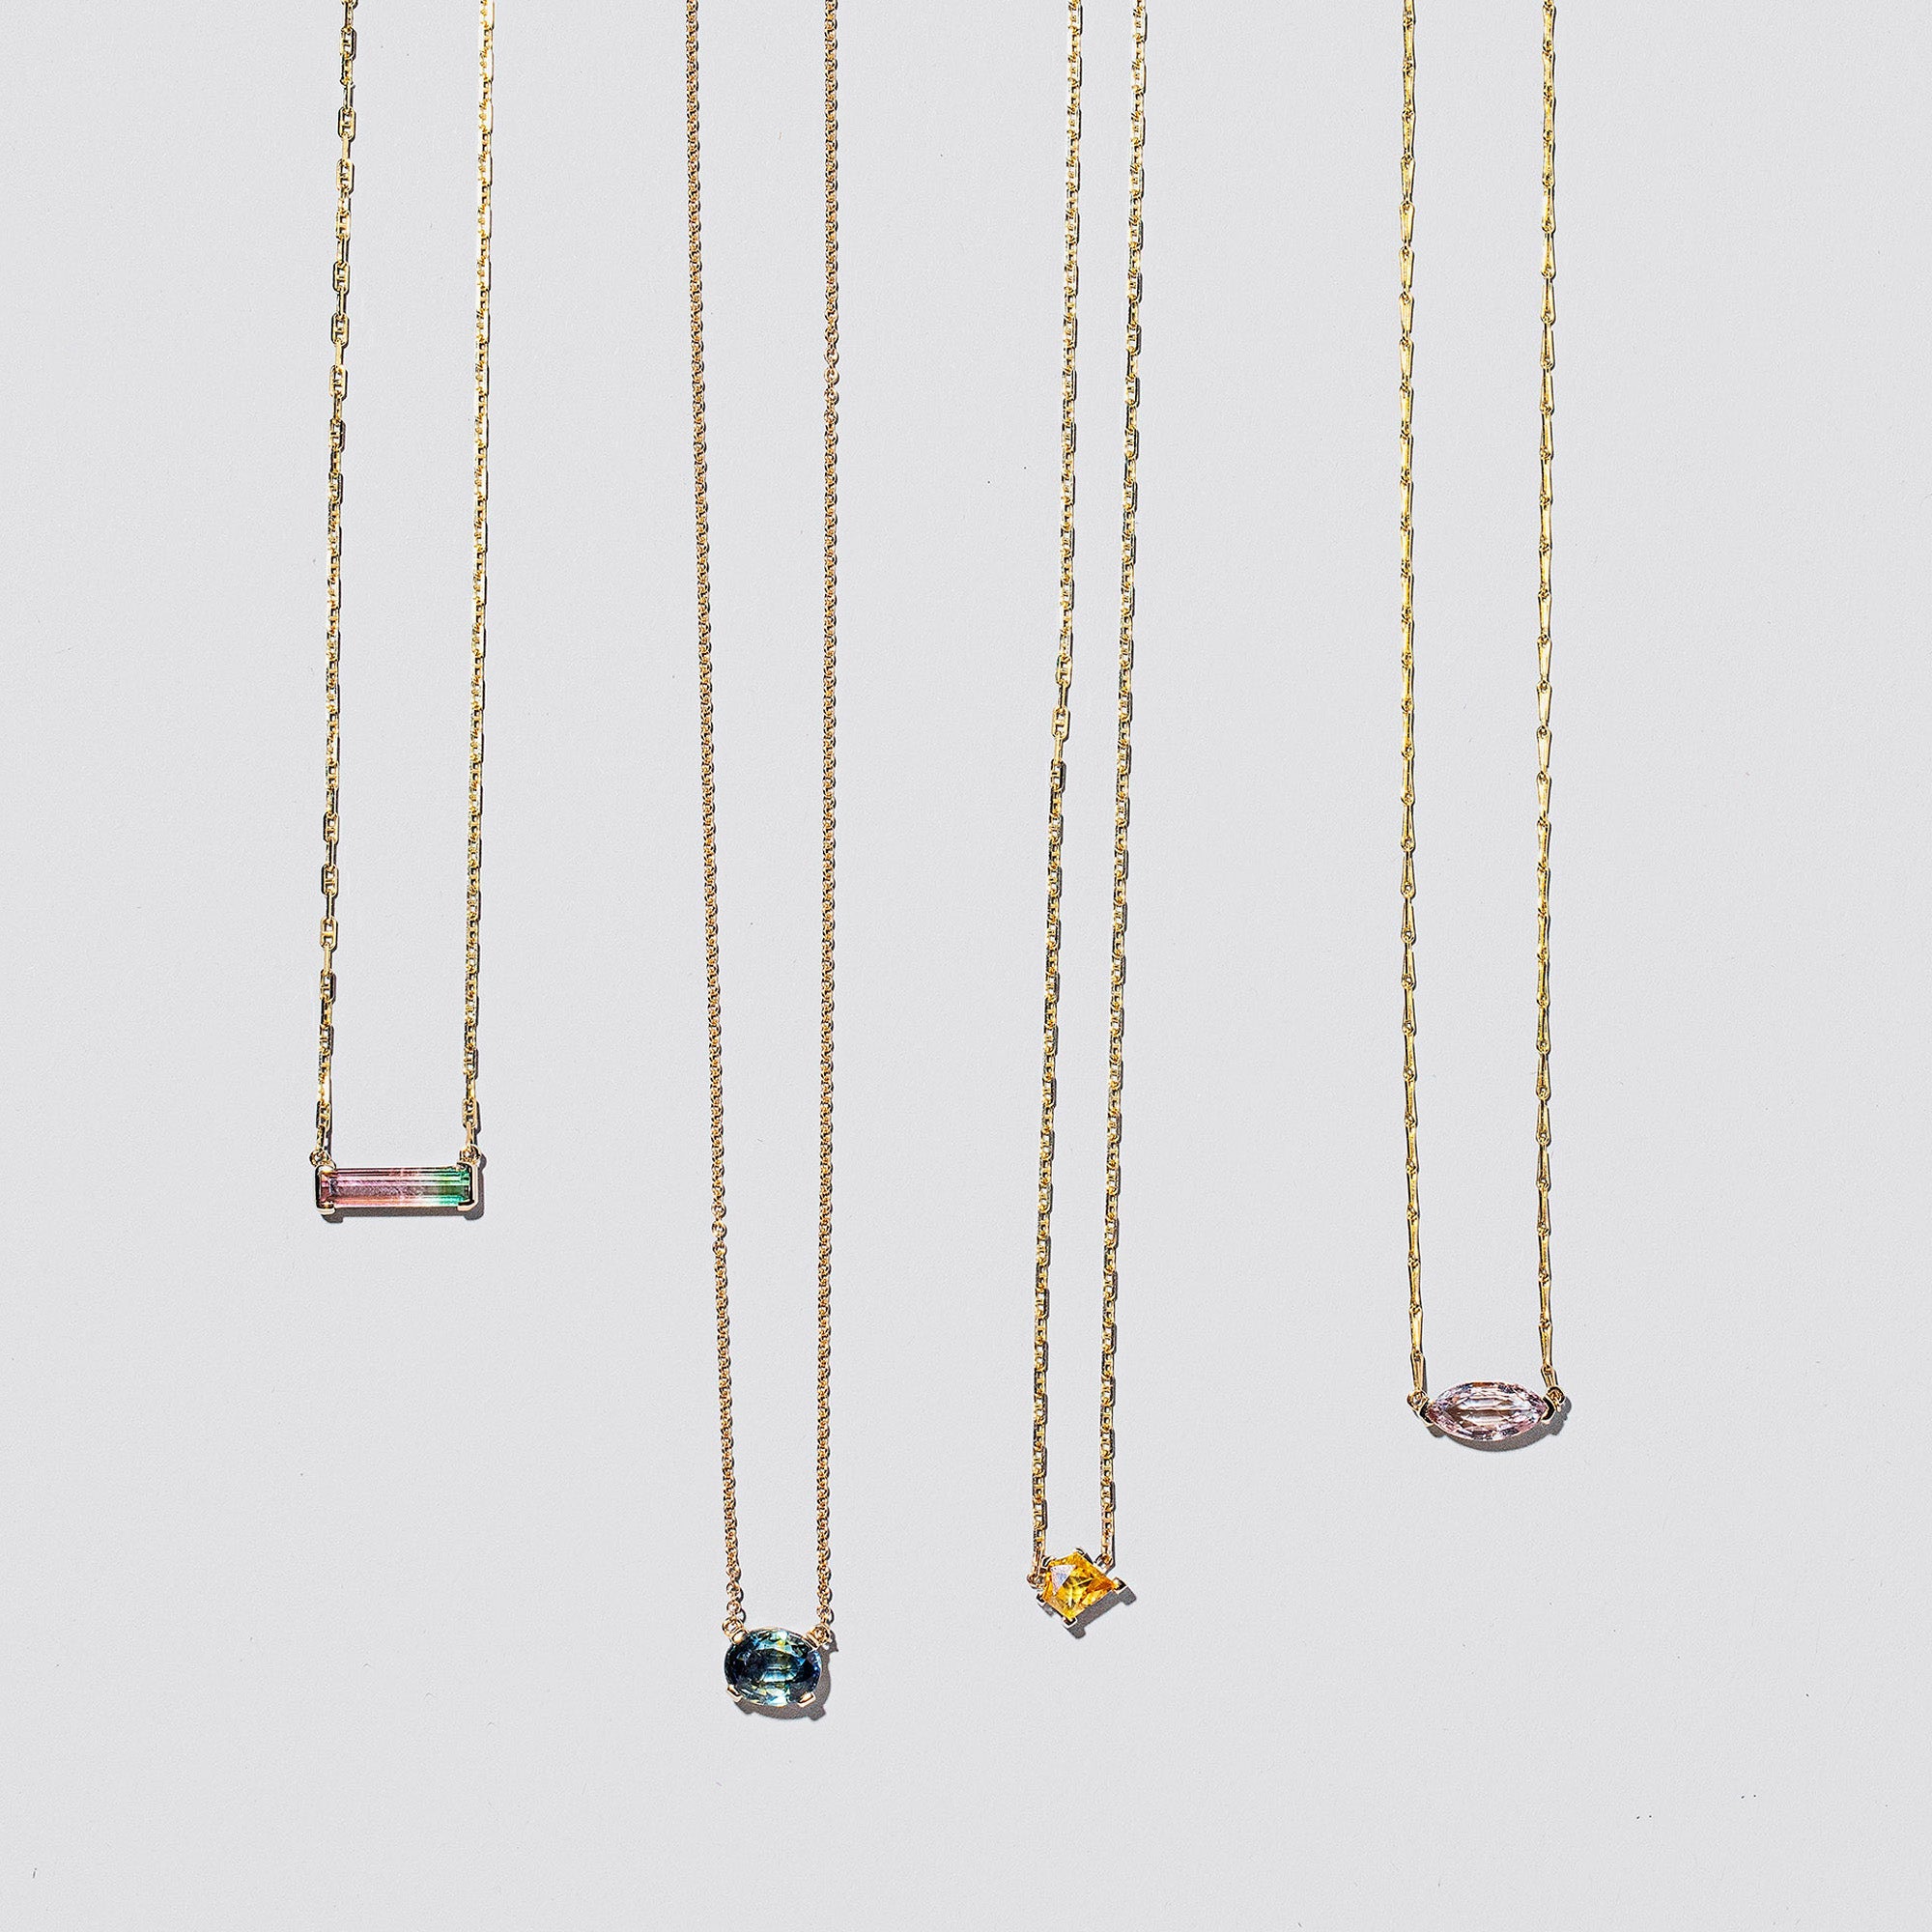 product_details::Group of Gemstone Necklaces on light colored background.